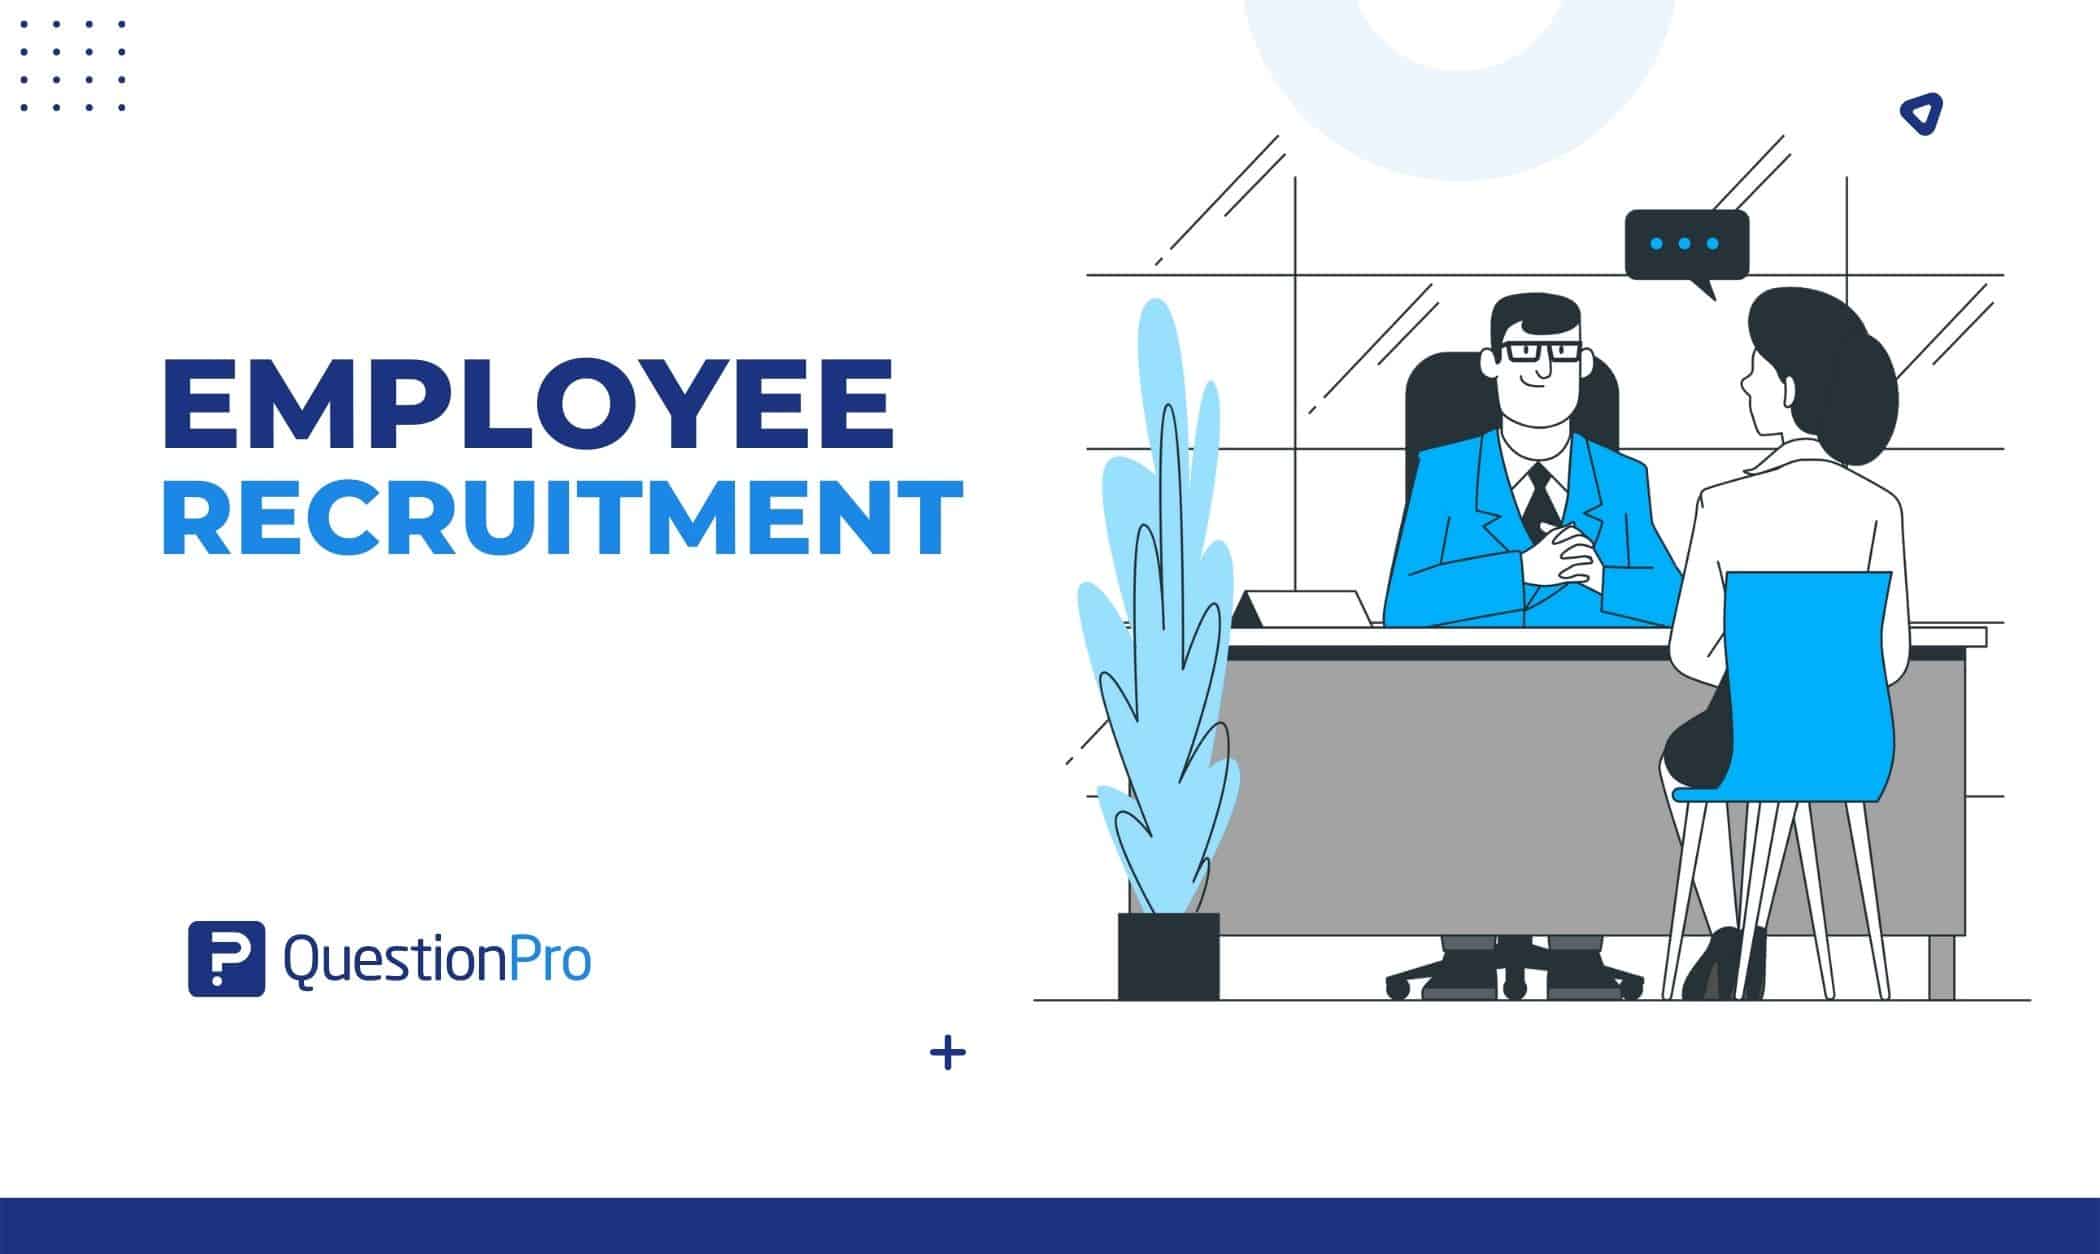 Employee recruitment is identifying, contacting, interviewing, qualifying, employing, and integrating a new employee. Get Top 10 Strategies.